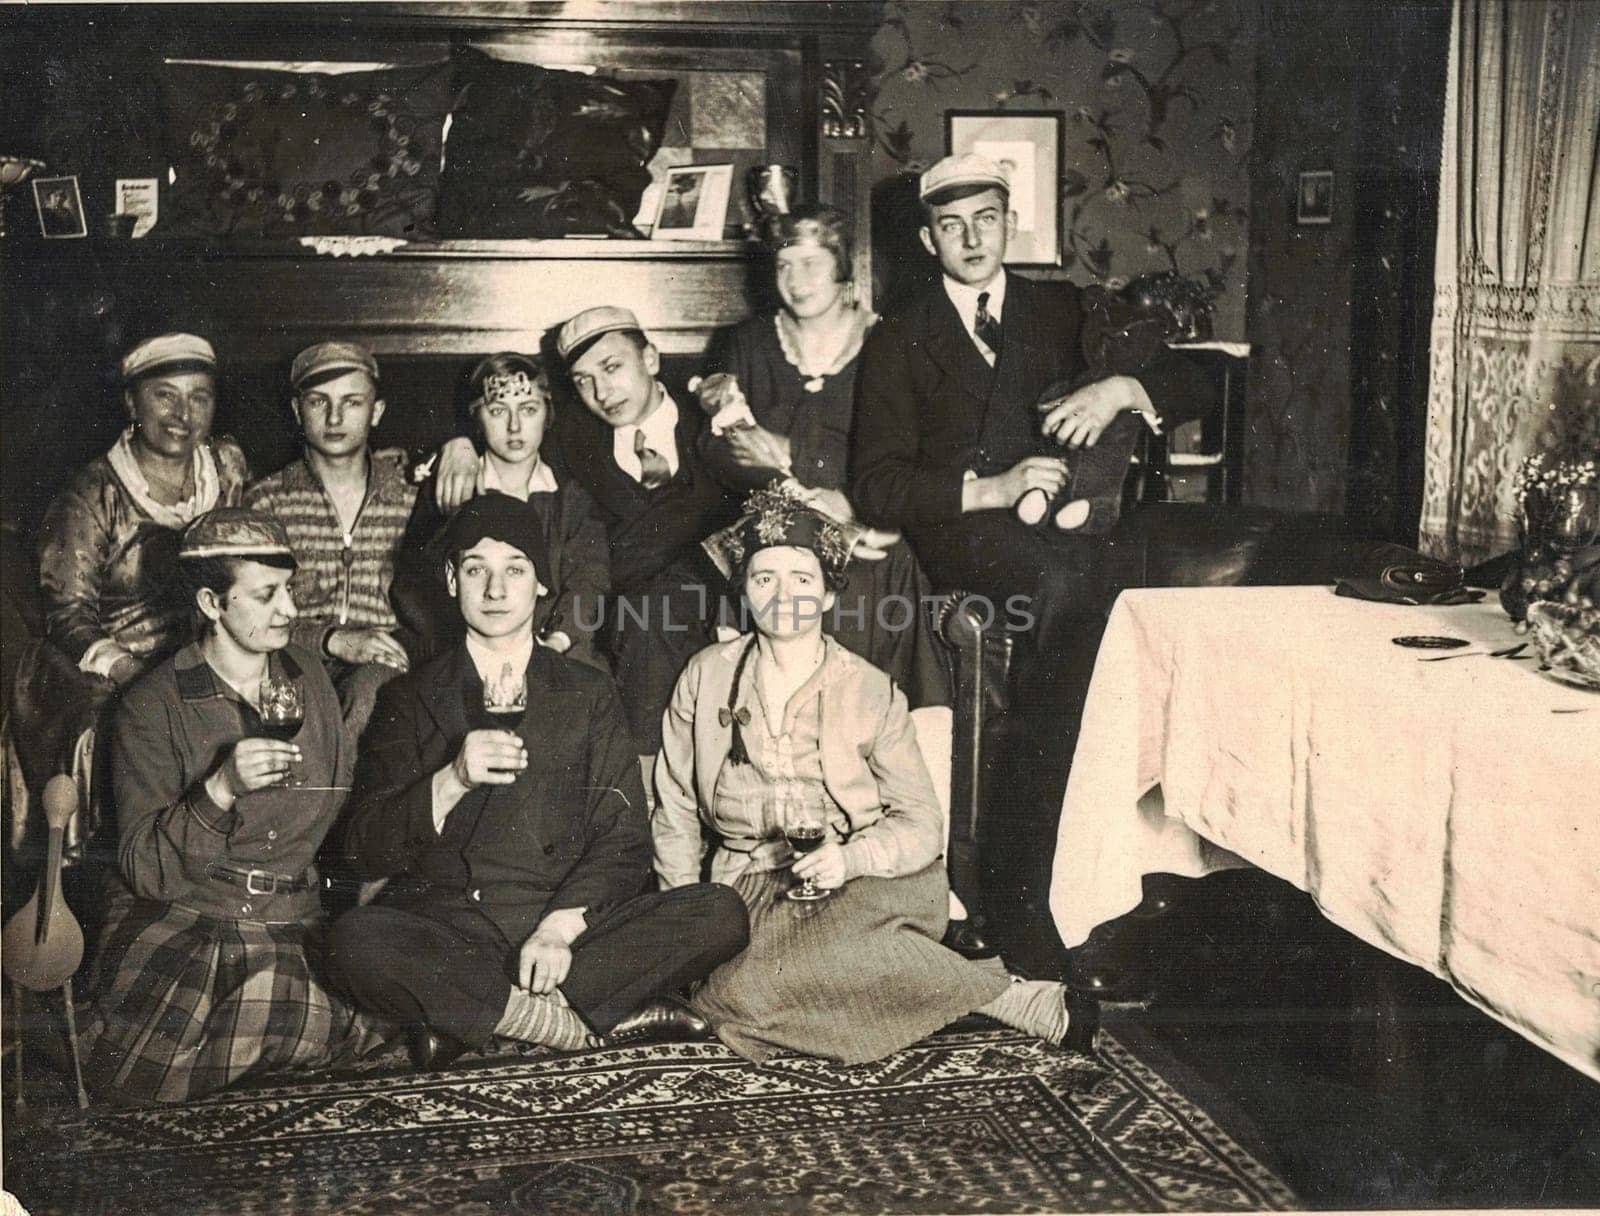 The retro photo shows a group of happy people celebrate a social event - birthday, party...Golden the thirties before the war. by roman_nerud